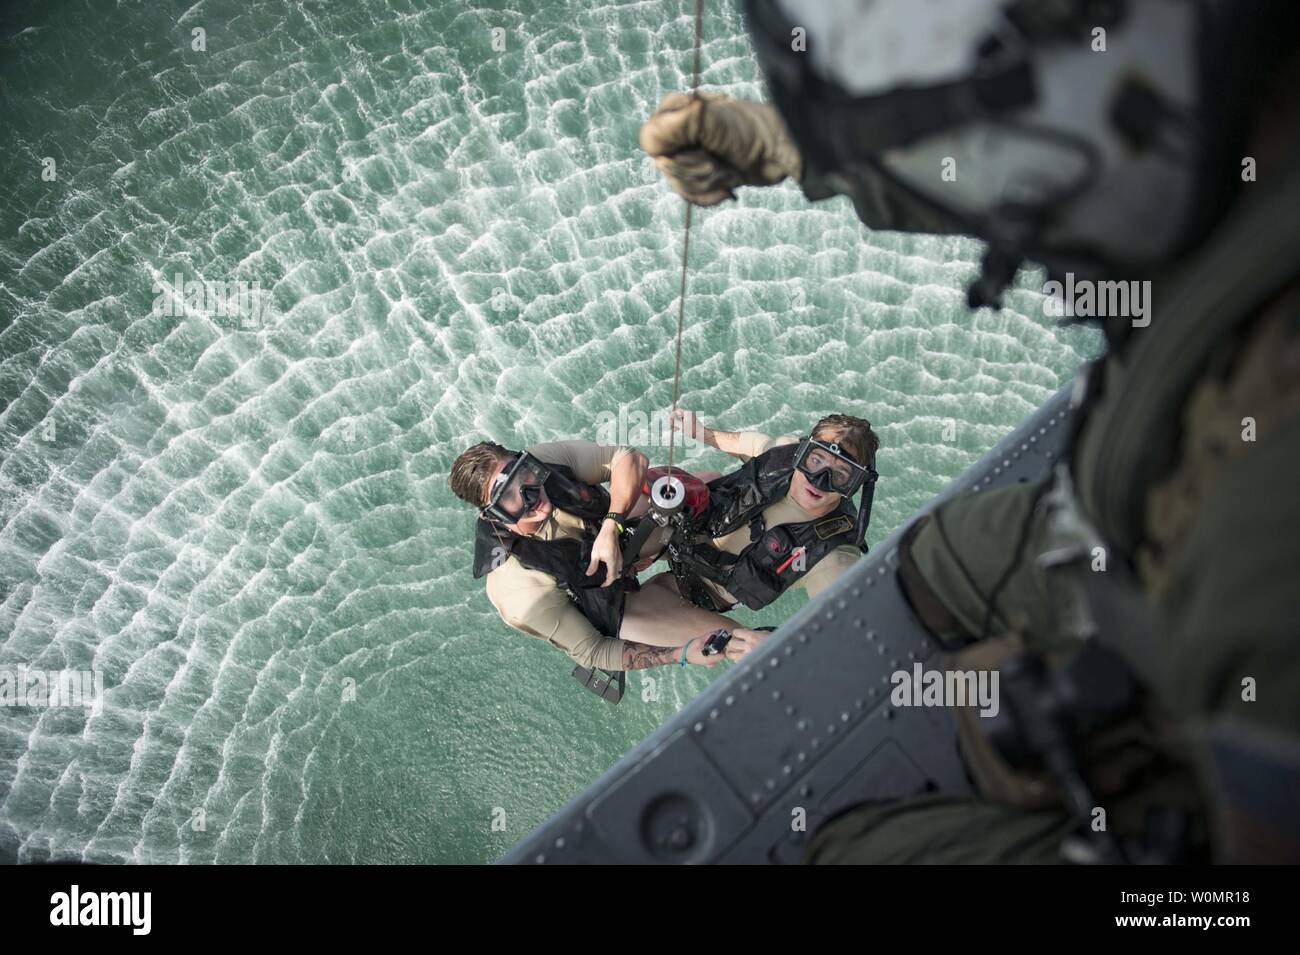 Naval Air Crewman (Helicopter) 2nd Class Ben McCracken (left) and Naval Air Crewman (Helicopter) 3rd Class Sean Magee, both assigned to Helicopter Sea Combat Squadron (HSC) 21, are hoisted from the water during a Pacific Partnership 2016 search and rescue drill on August 29, 2016. During the drill, aviation rescue swimmers hoisted simulated casualties from the water into an MH-60S helicopter for medical evacuation to hospital ship USNS Mercy (T-AH 19). Photo by Mass Communication Specialist 3rd Class Trevor Kohlrus/U.S. Navy/UPI Stock Photo